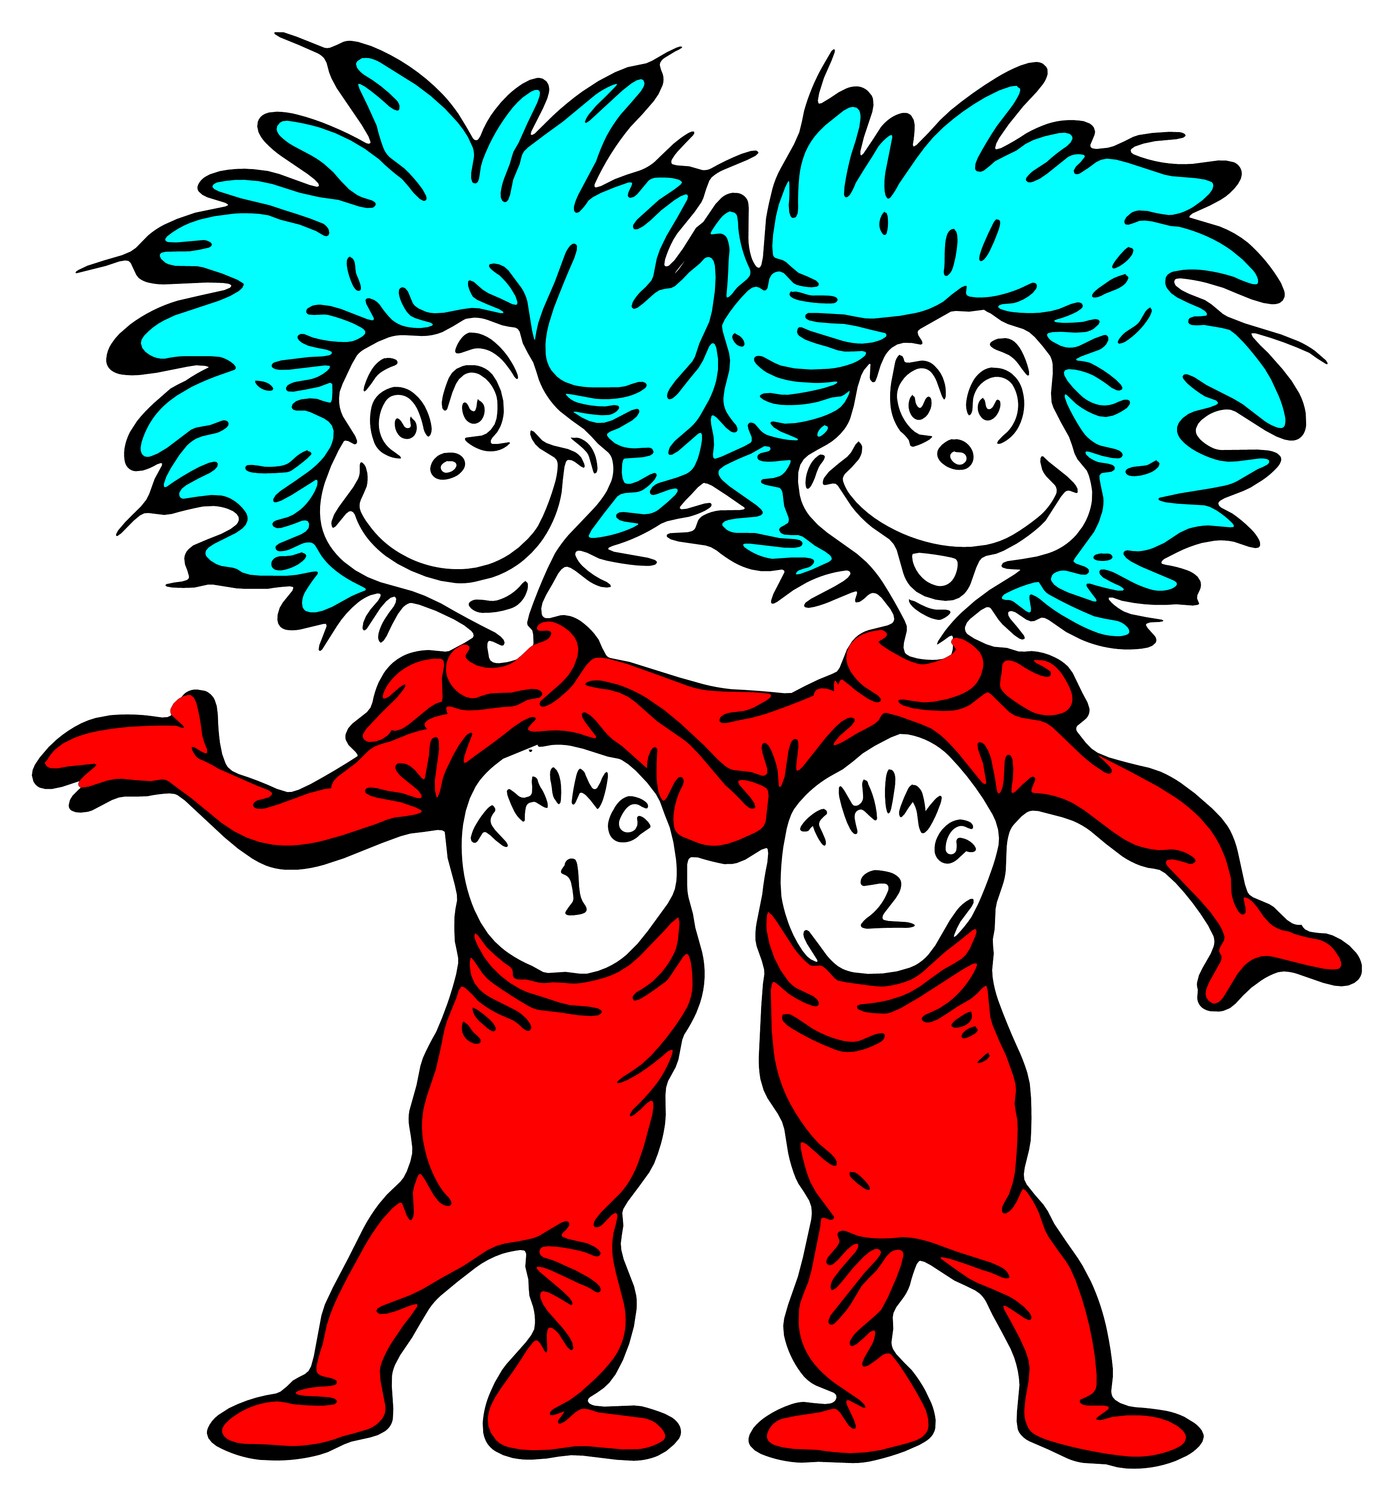 Dr. Seuss Clip Art | Thing 1 and thing 2 font Not Found | Kylees ...